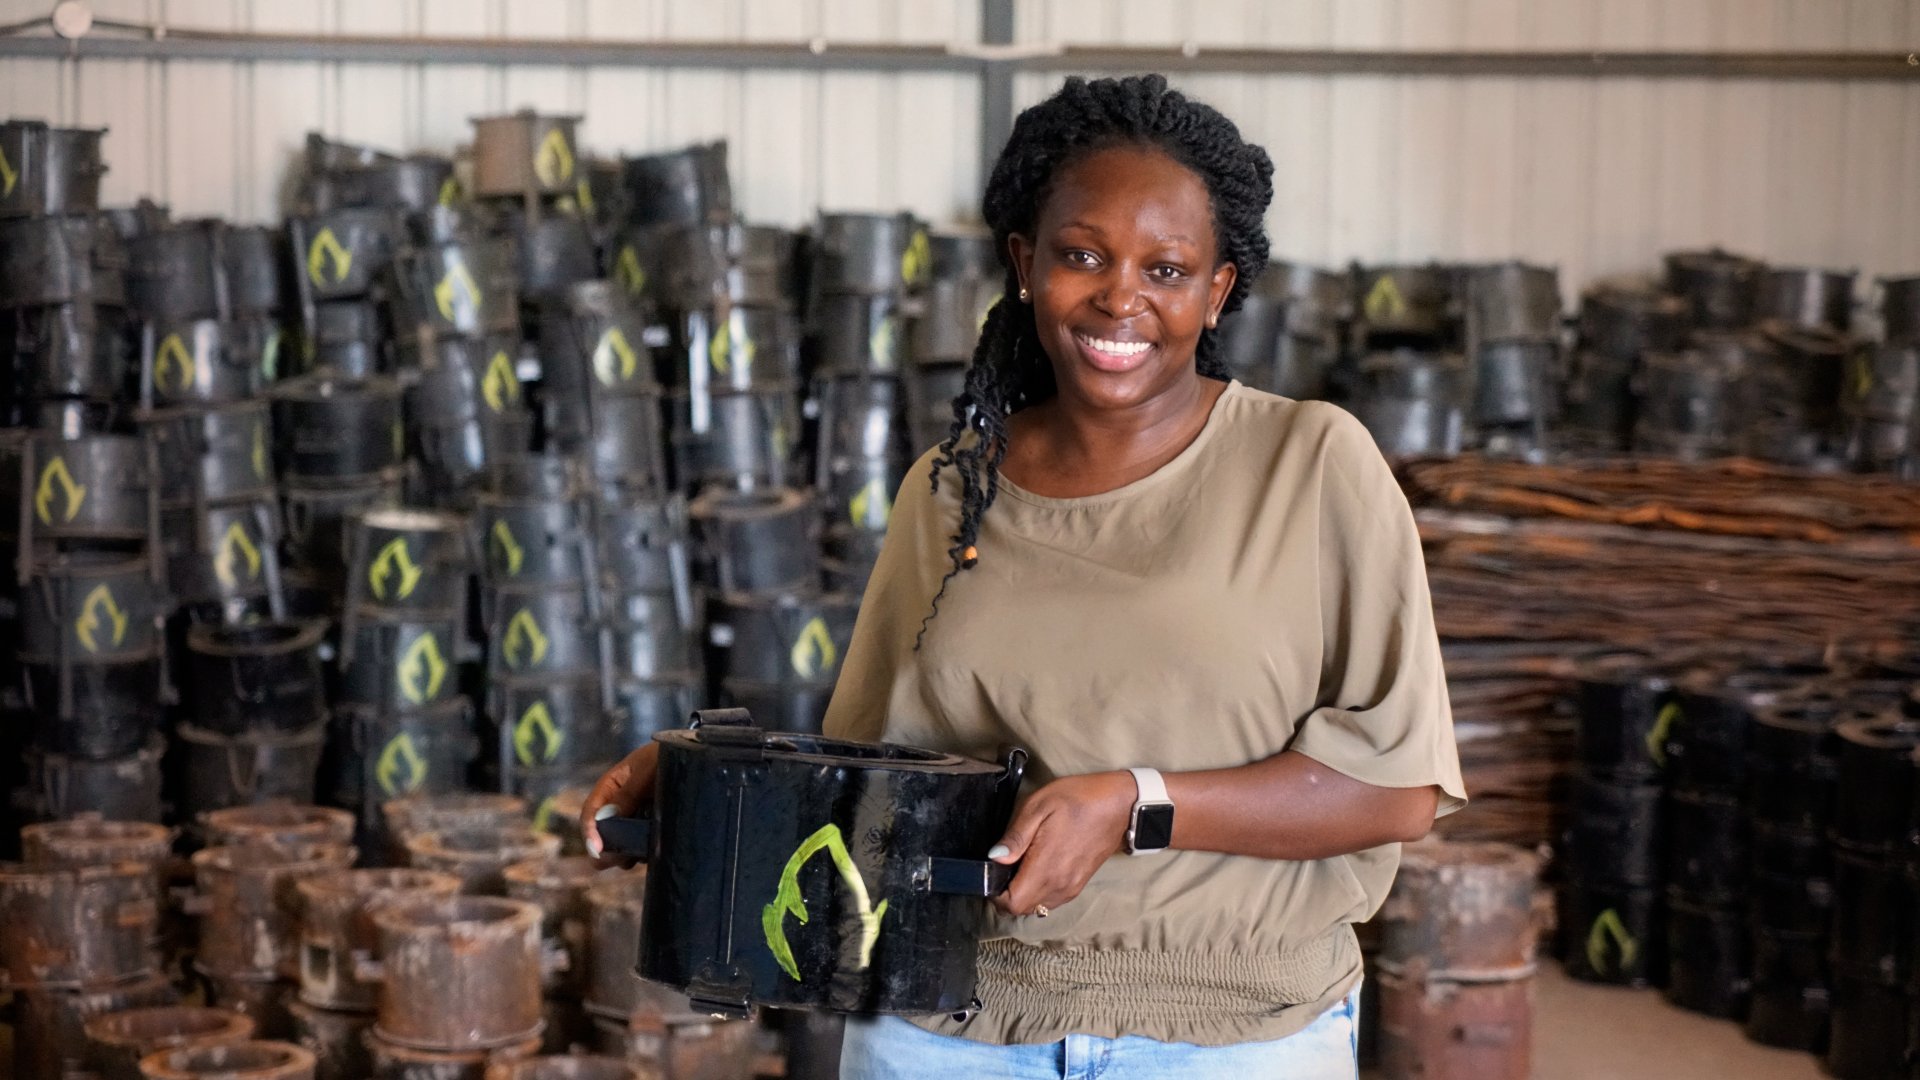 Charlot Magayi, founder of Mukuru Clean Stoves, holding an example of her organization's cleaner-burning cookstoves. (Courtesy of Mukuru Clean Stoves/The Earthshot Prize)